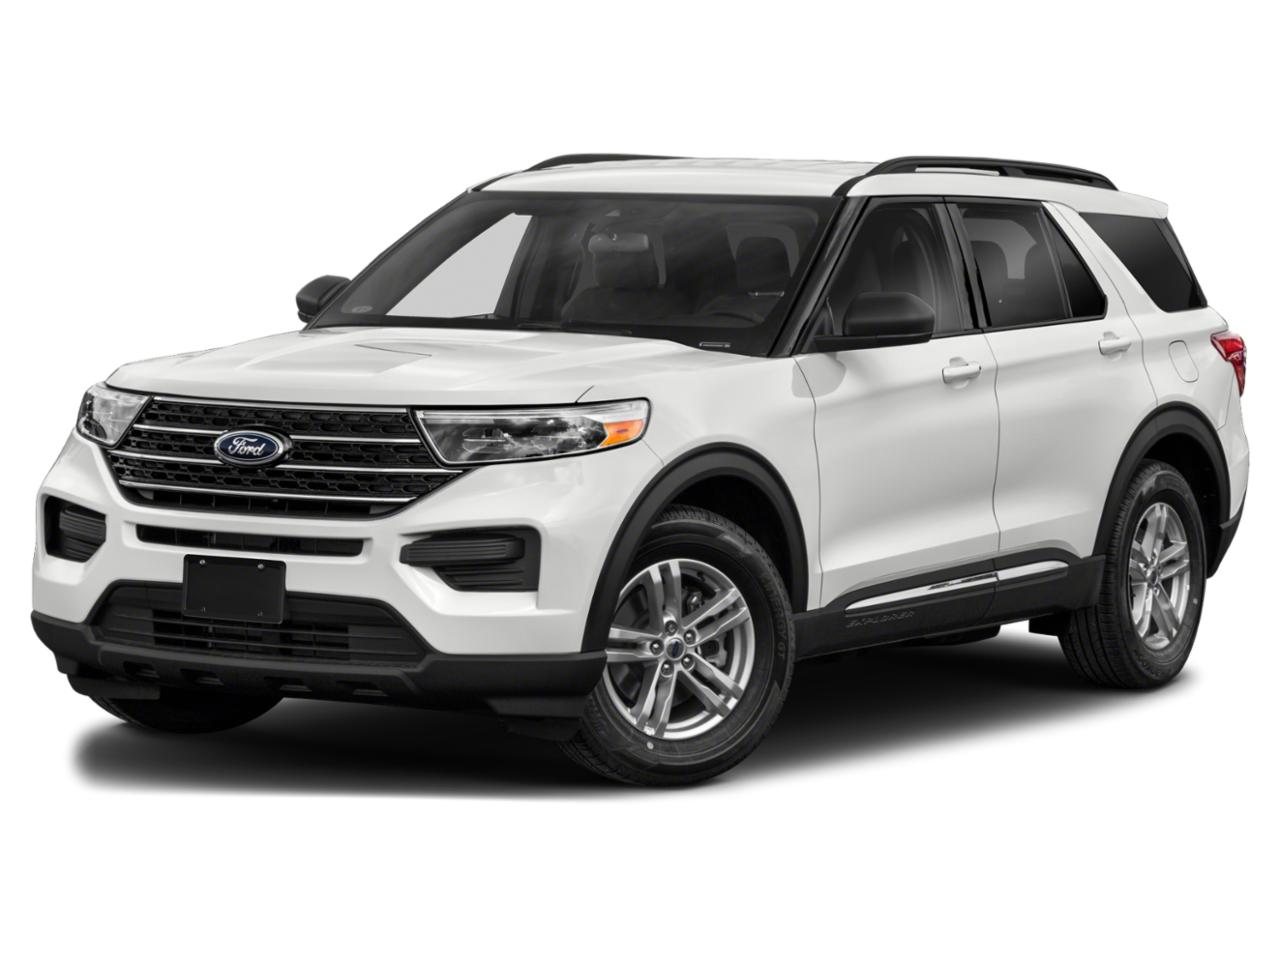 2020 Ford Explorer Vehicle Photo in Stephenville, TX 76401-3713